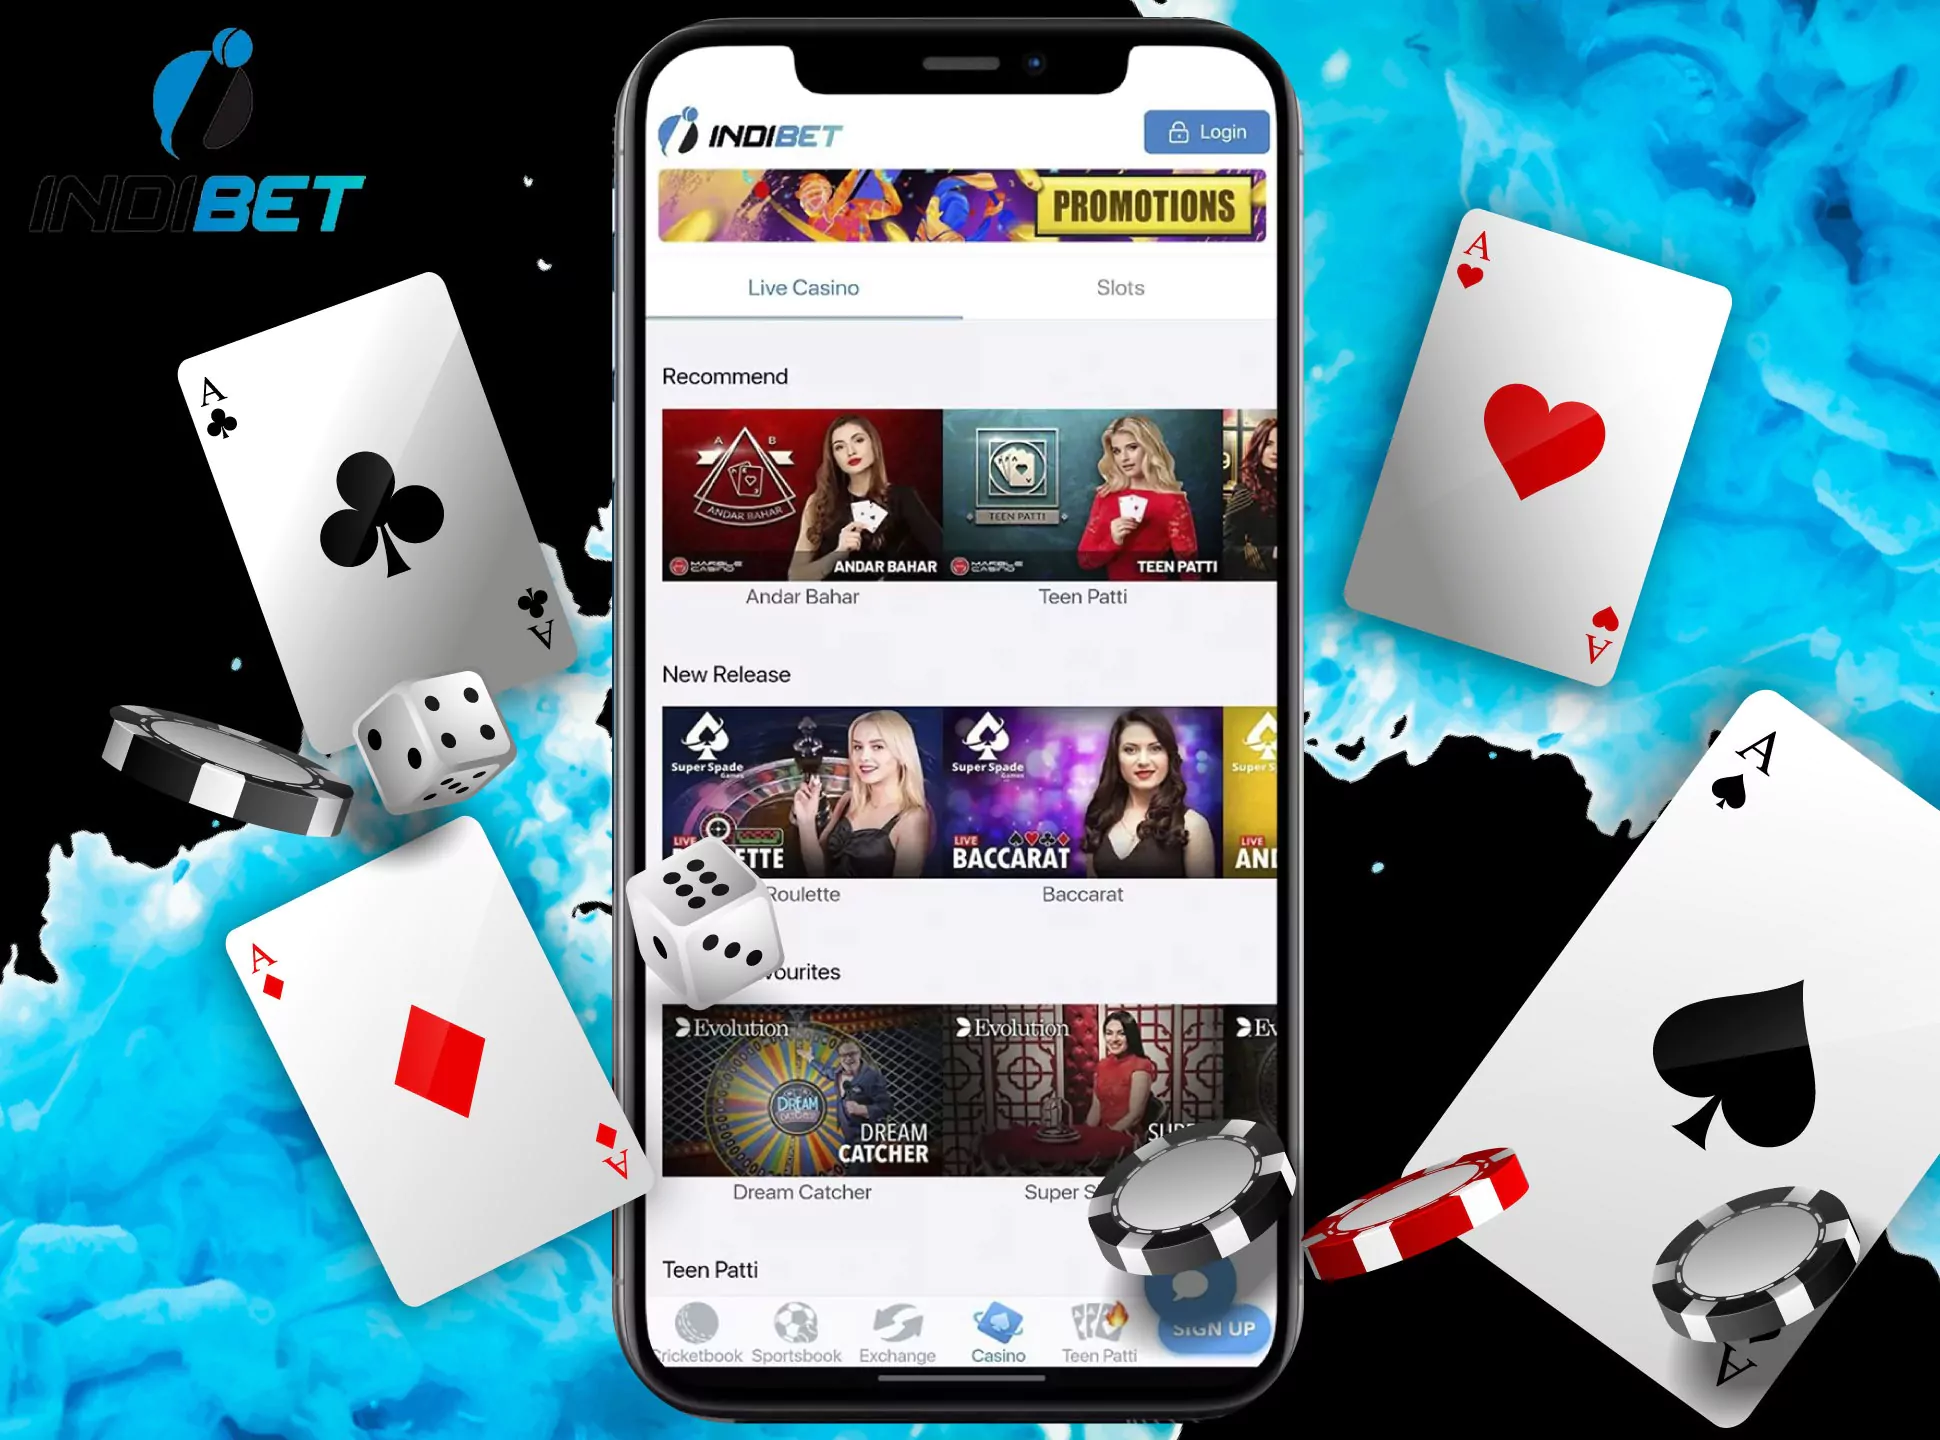 Play casino games using the app.